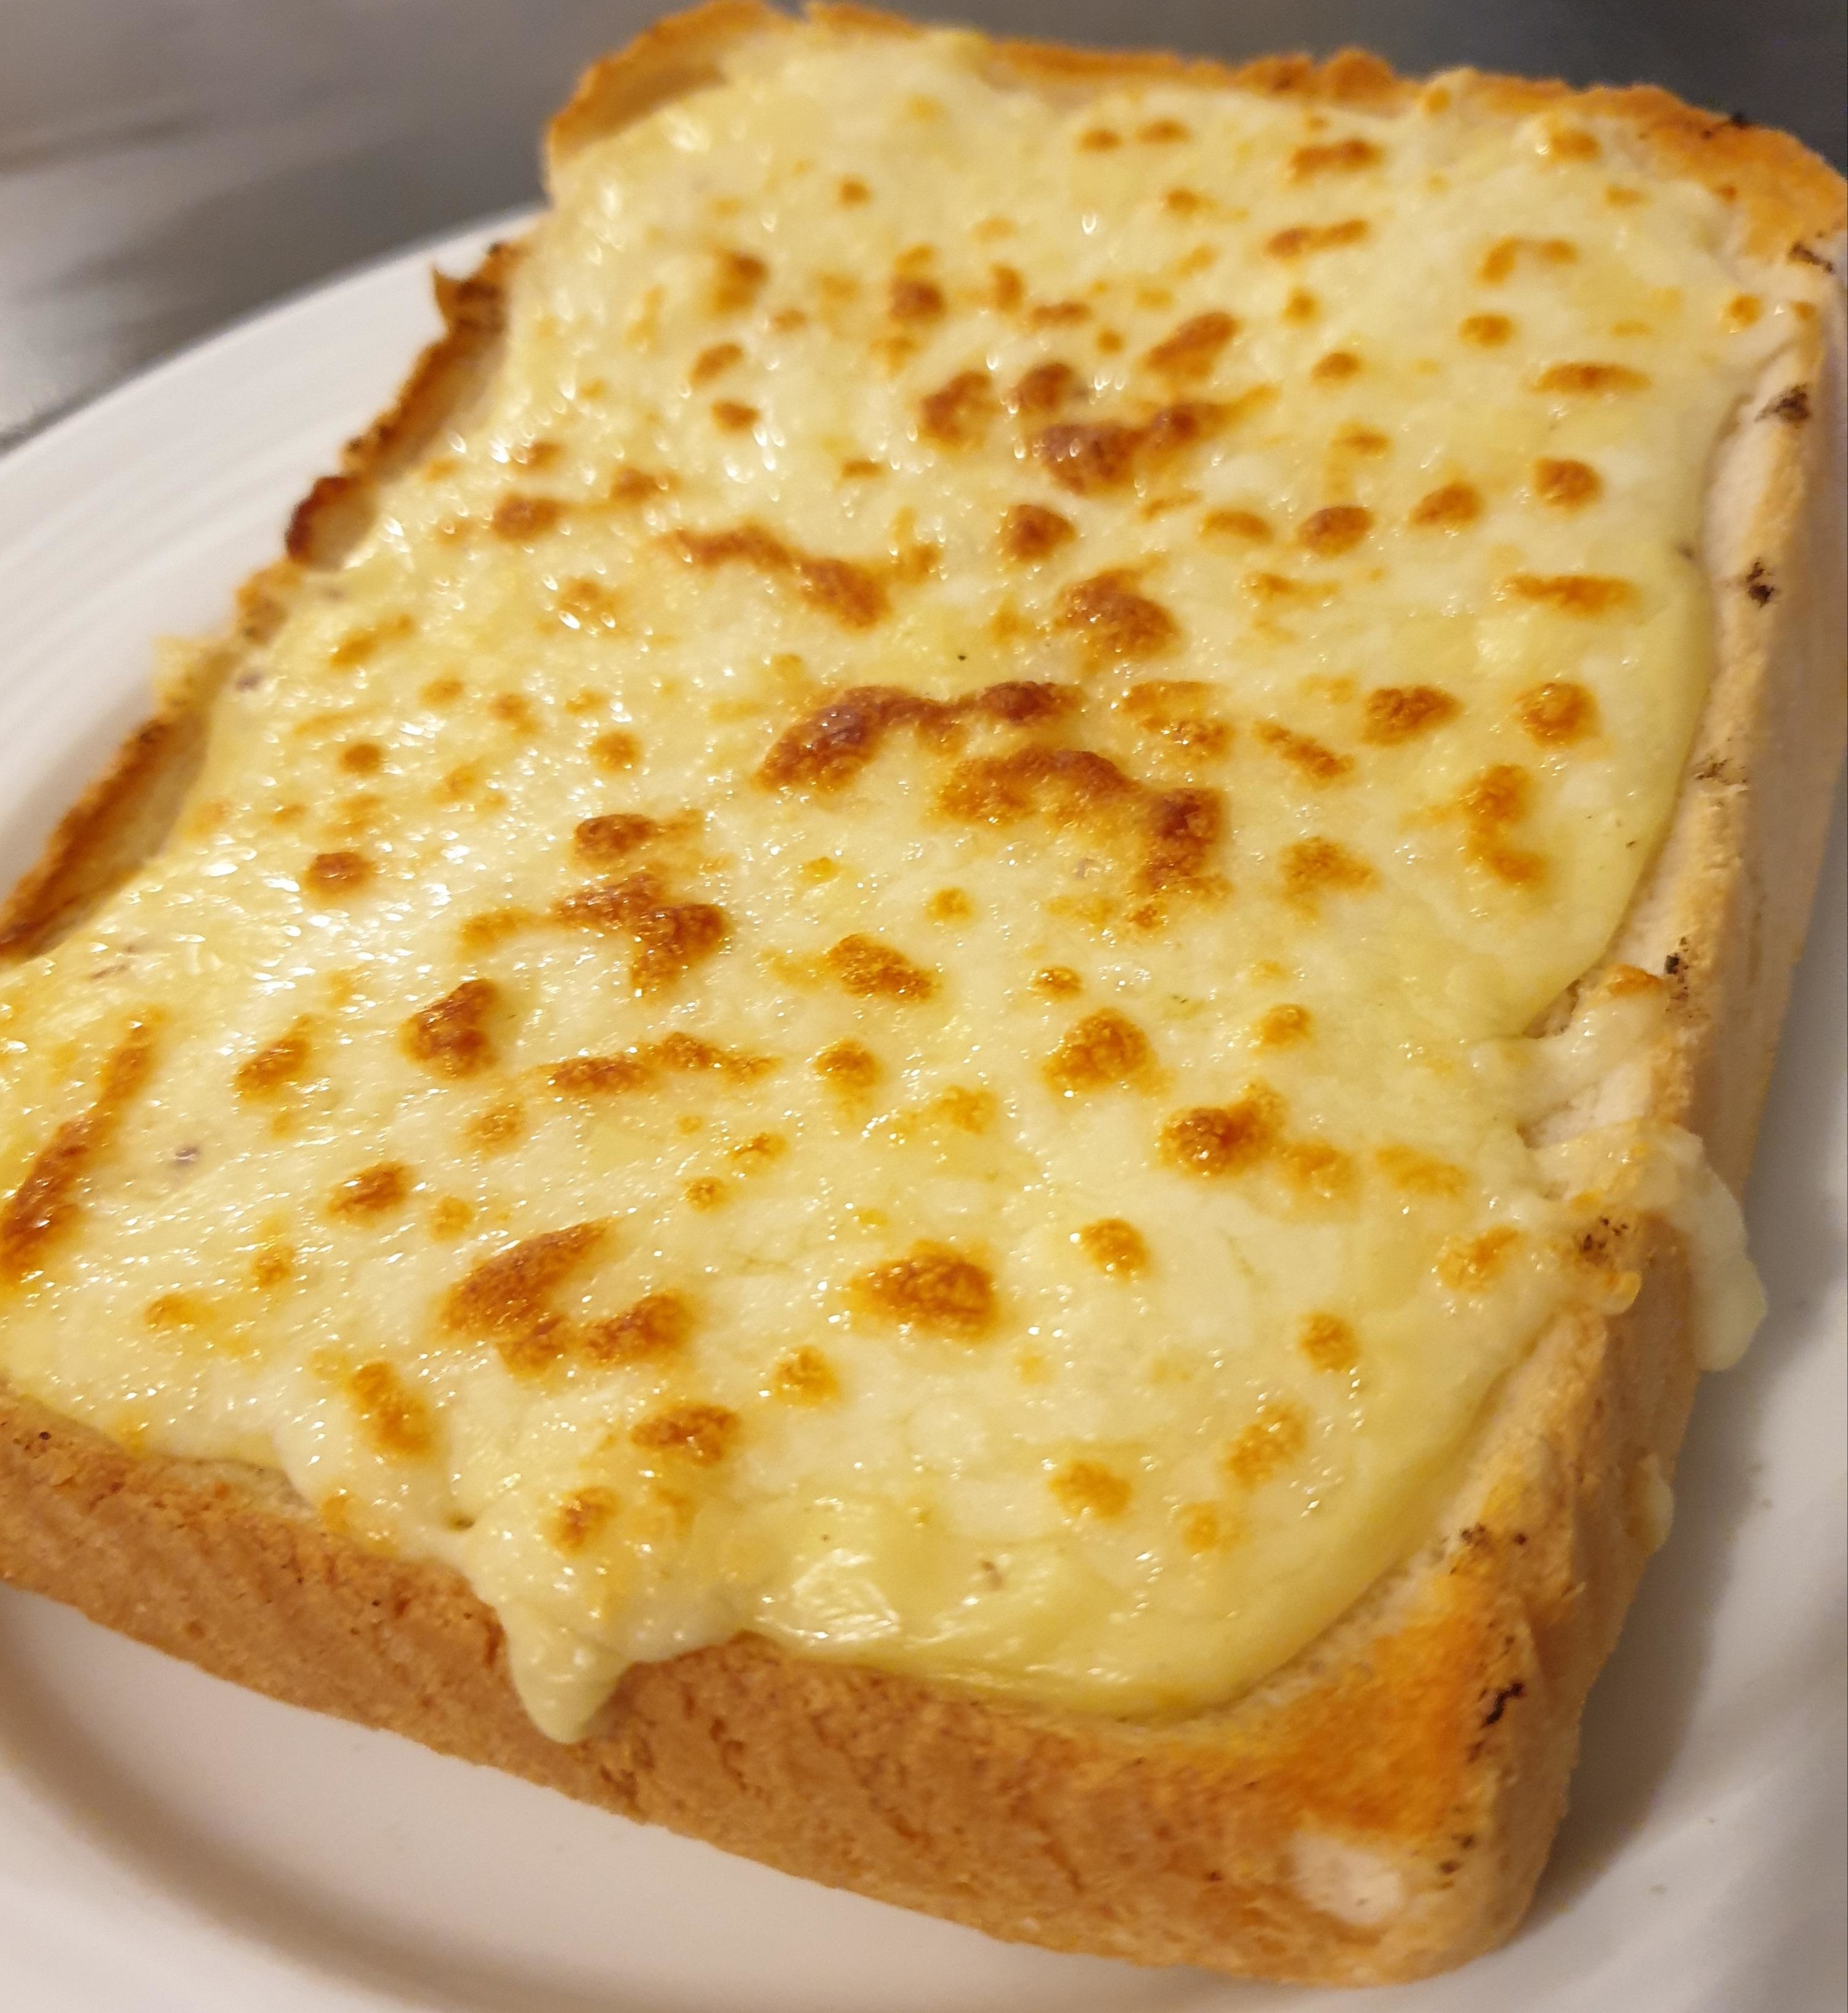 Toast with melted cheese.